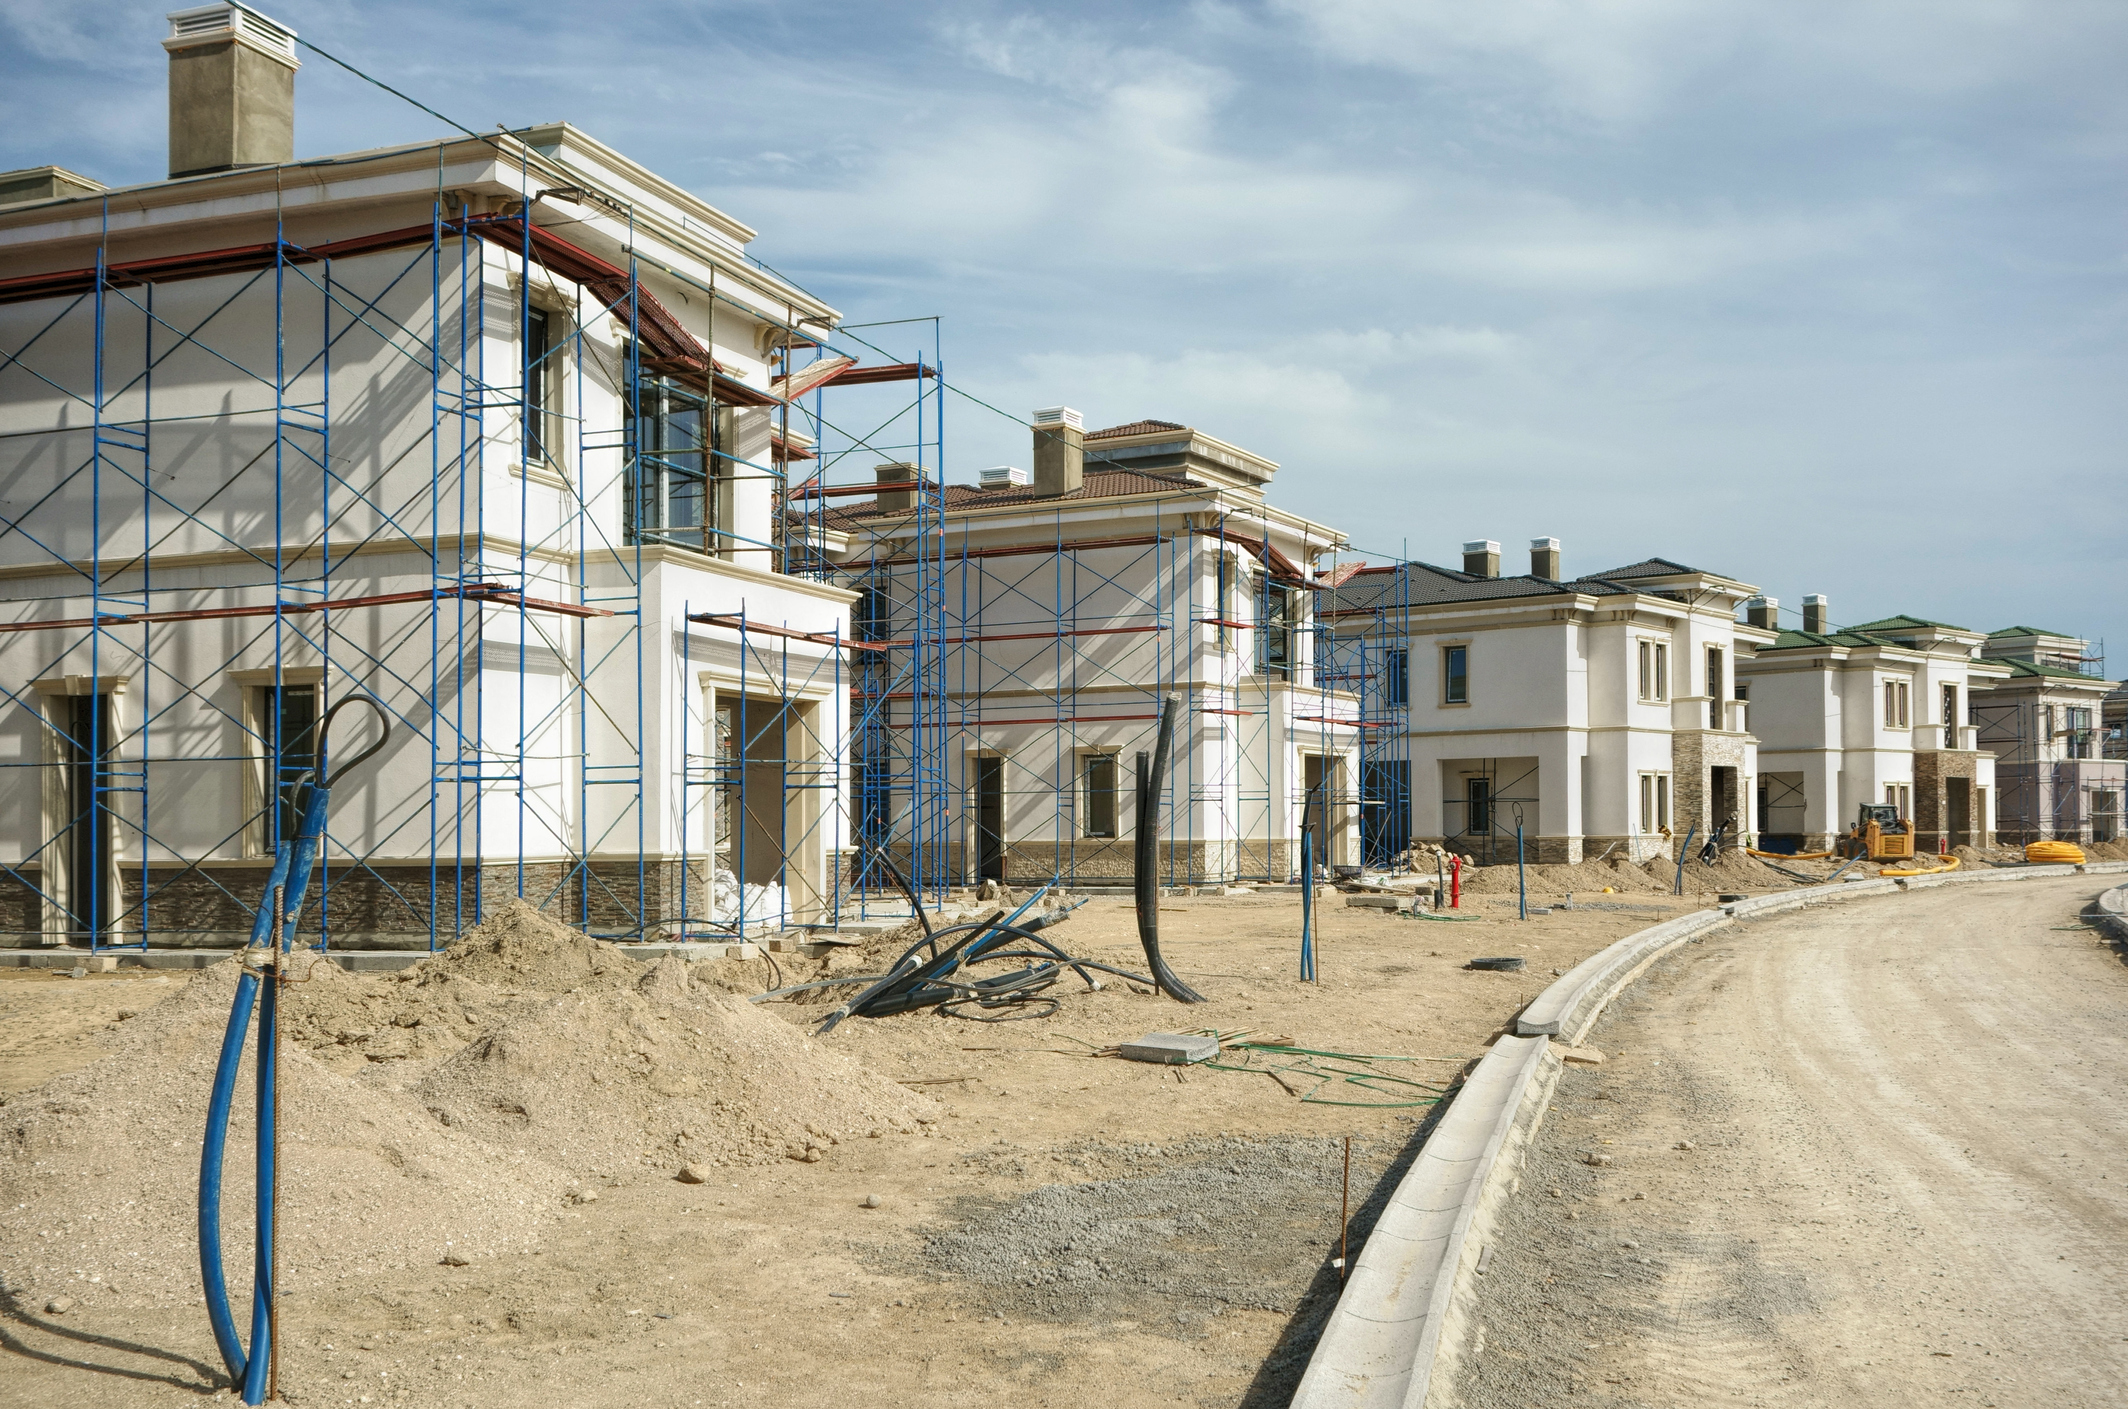 Photo of a neighborhood of houses under construction